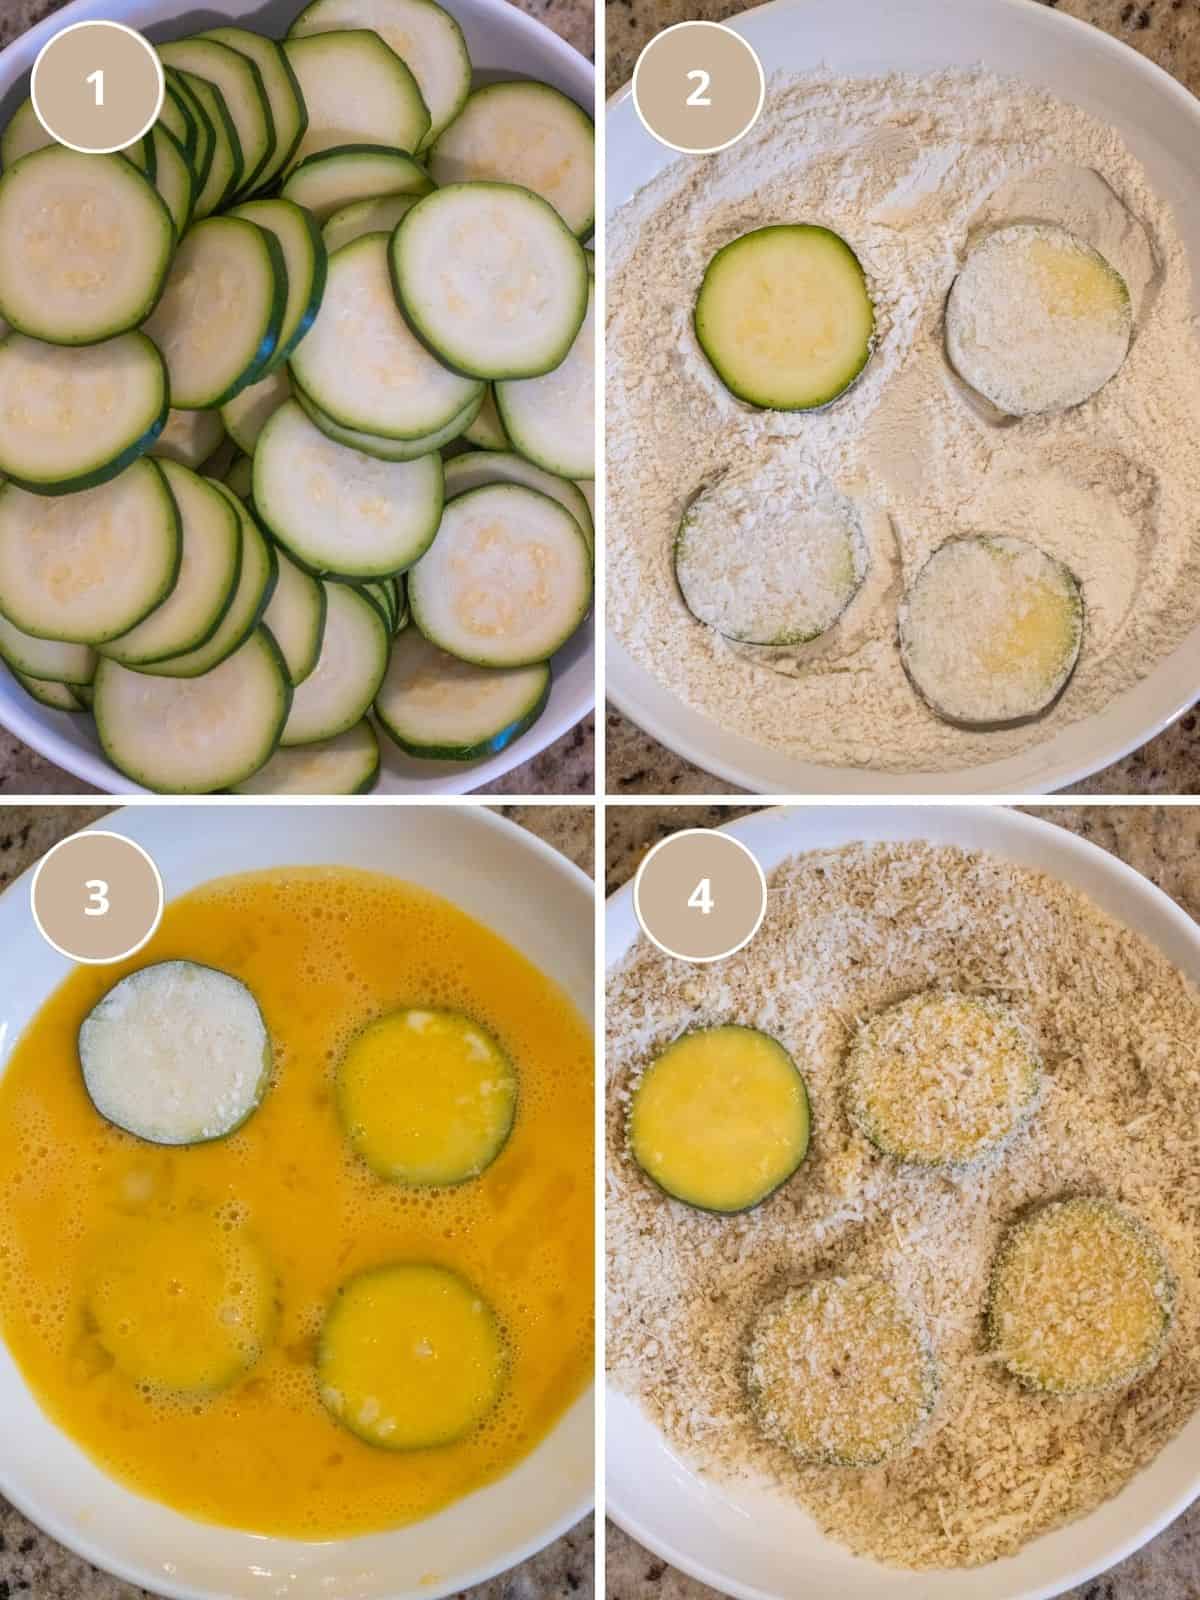 Four part grid showing zucchini chips being coated in flour, then egg, then seasoned panko breading.